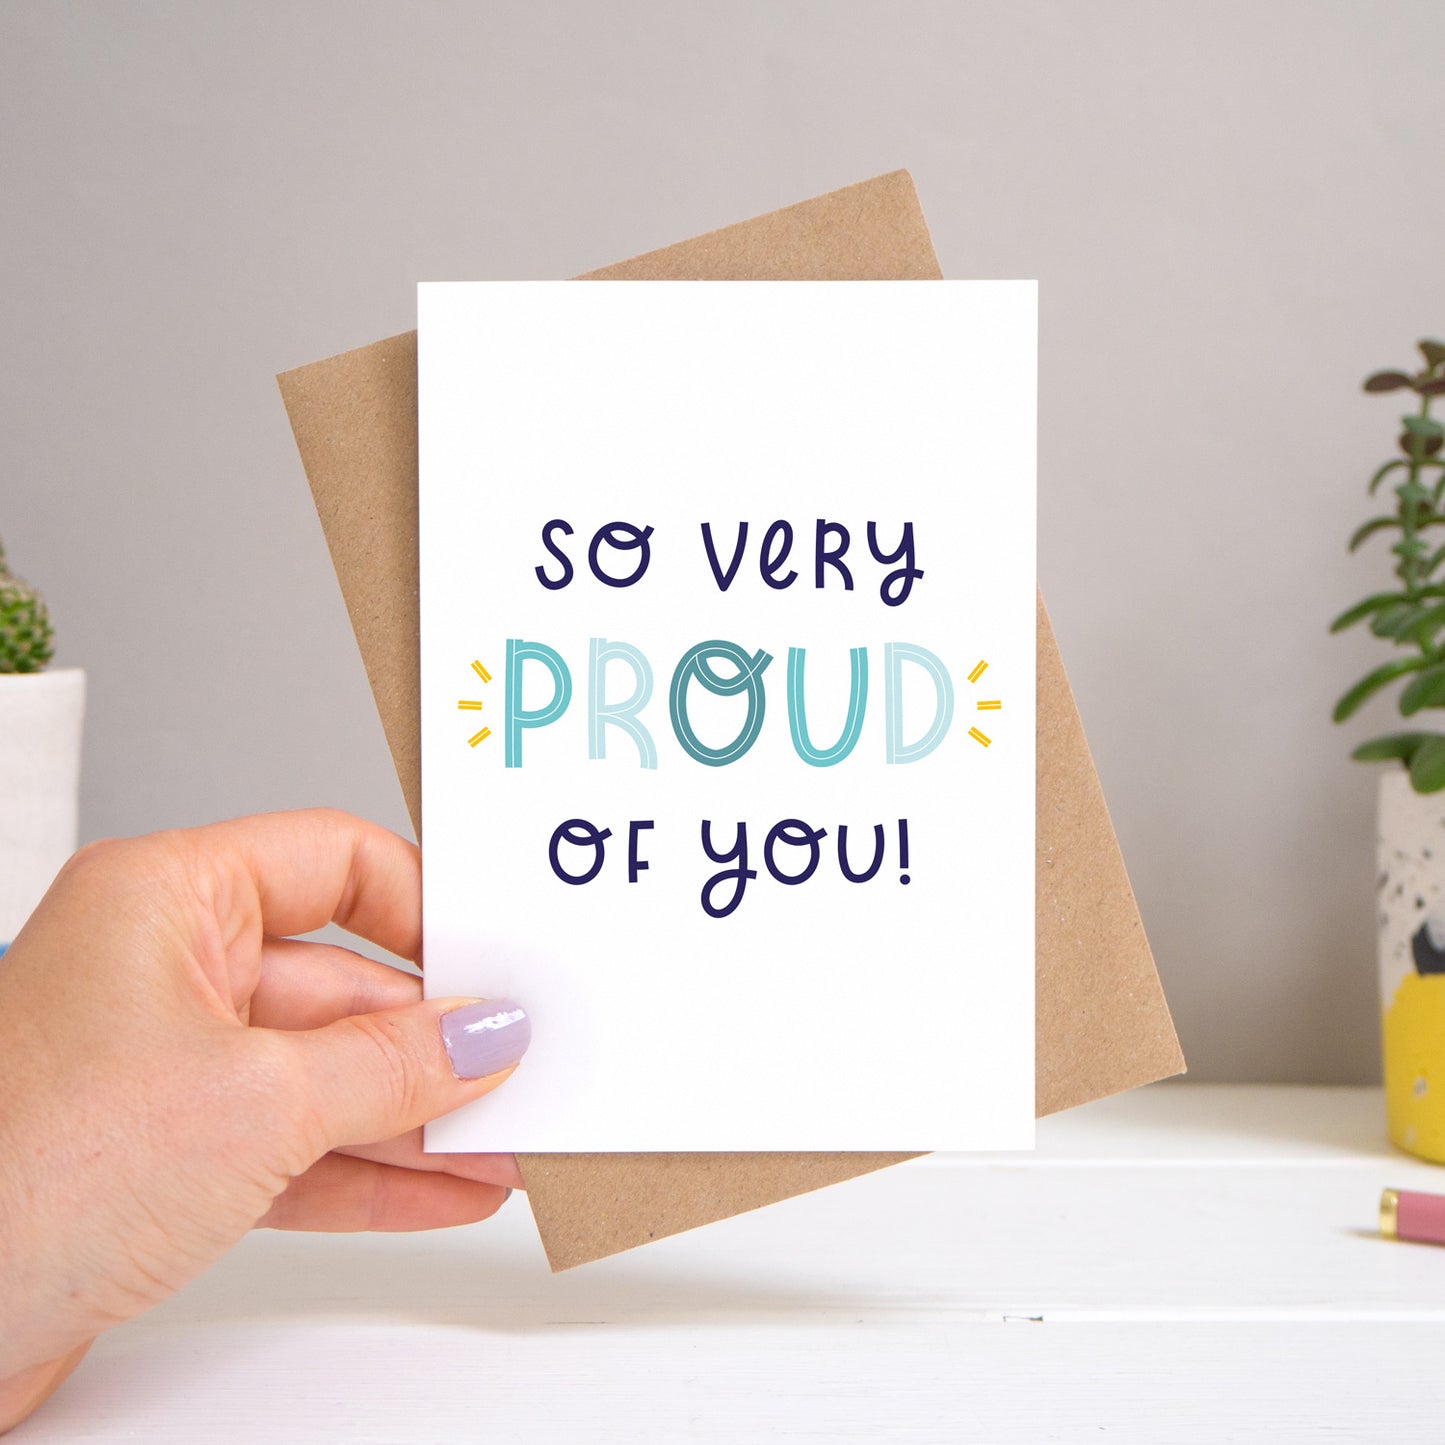 A ‘so very proud of you’ card held over a warm grey and white background with potted plants peeping the sides. Behind the card is a kraft brown envelope that comes with the card. The text on this version of the card is in varying tones of navy and blue.